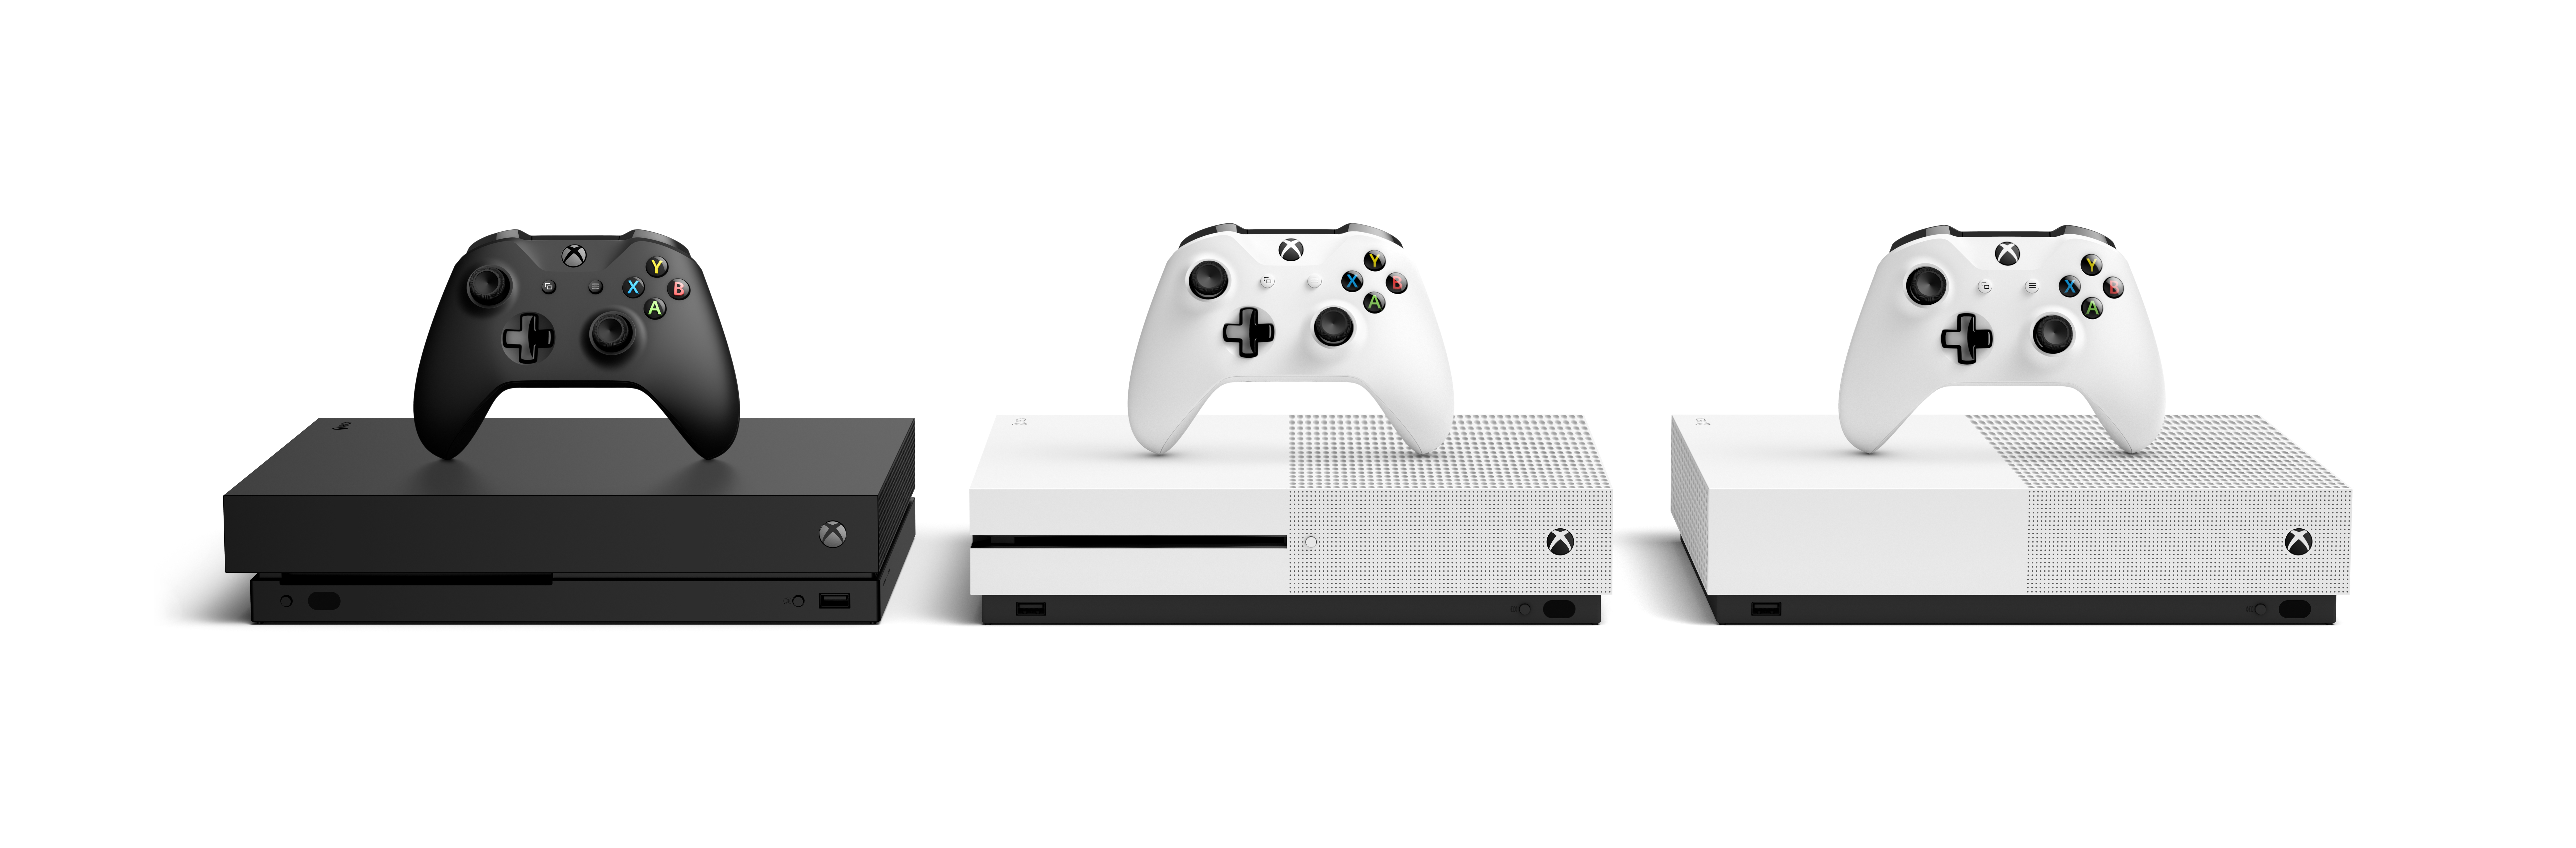 Xbox One S All-Digital Edition: Release Date, Specs, Price, And More -  GameSpot